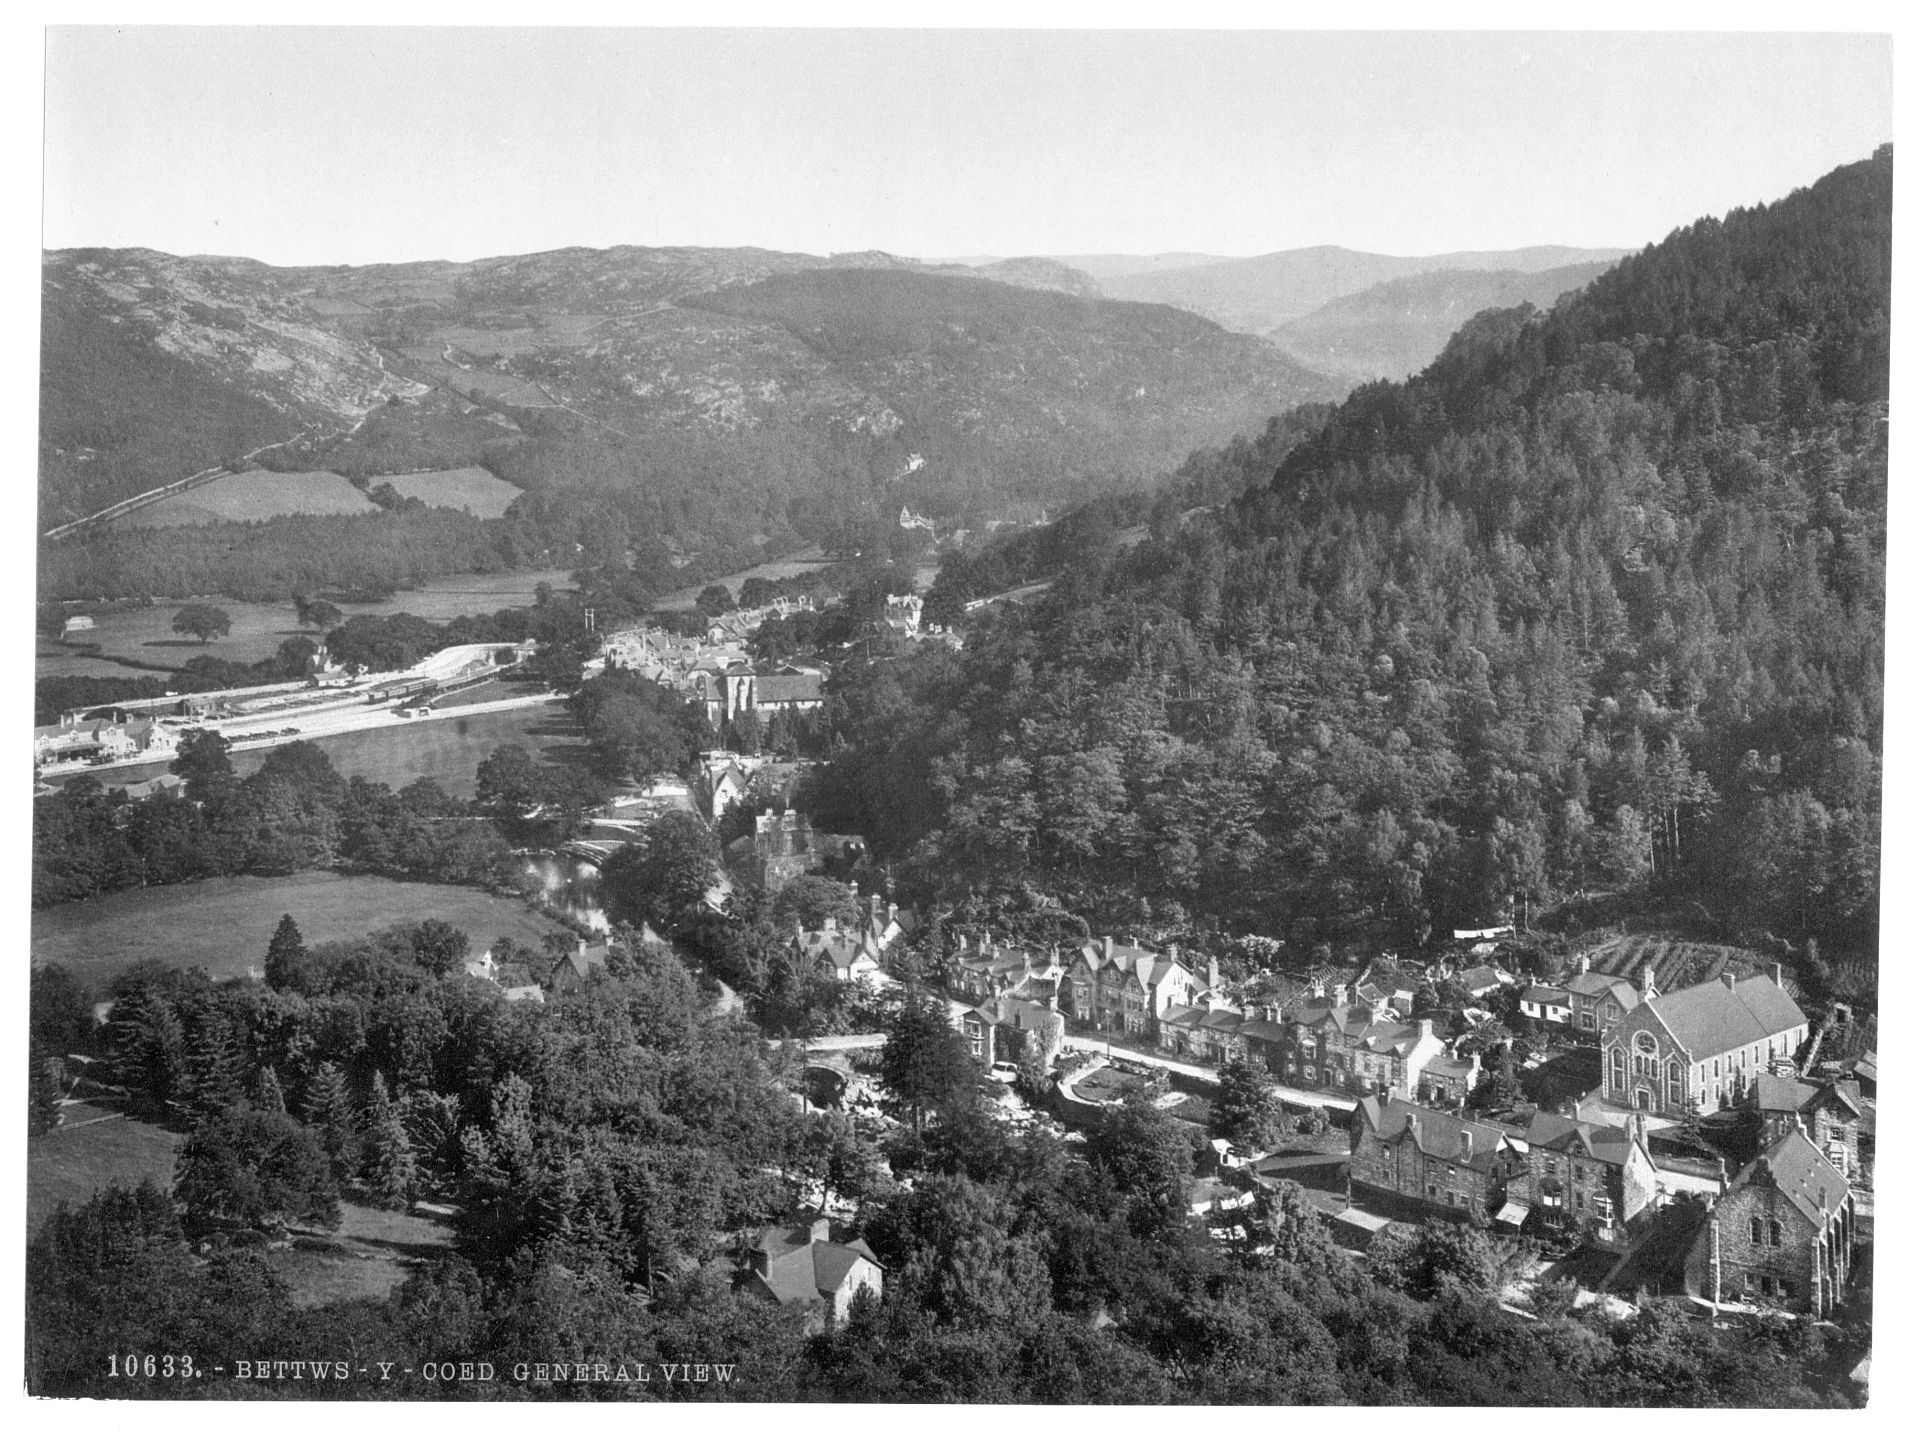 General view, Bettws-y-Coed (i.e. Betws), Wales